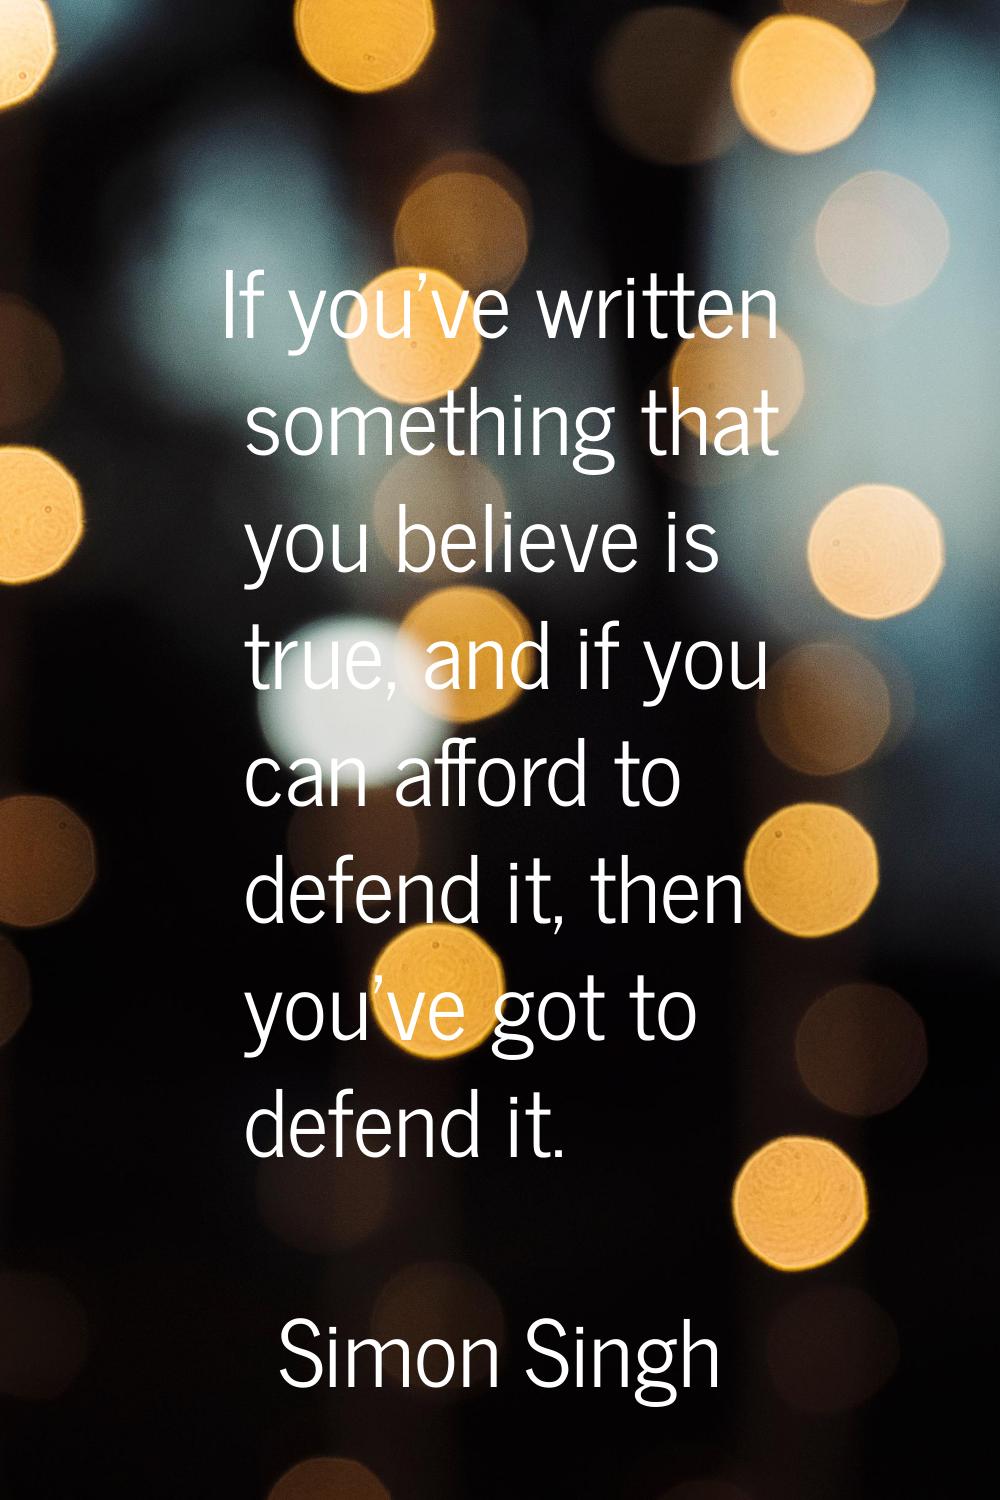 If you’ve written something that you believe is true, and if you can afford to defend it, then you’